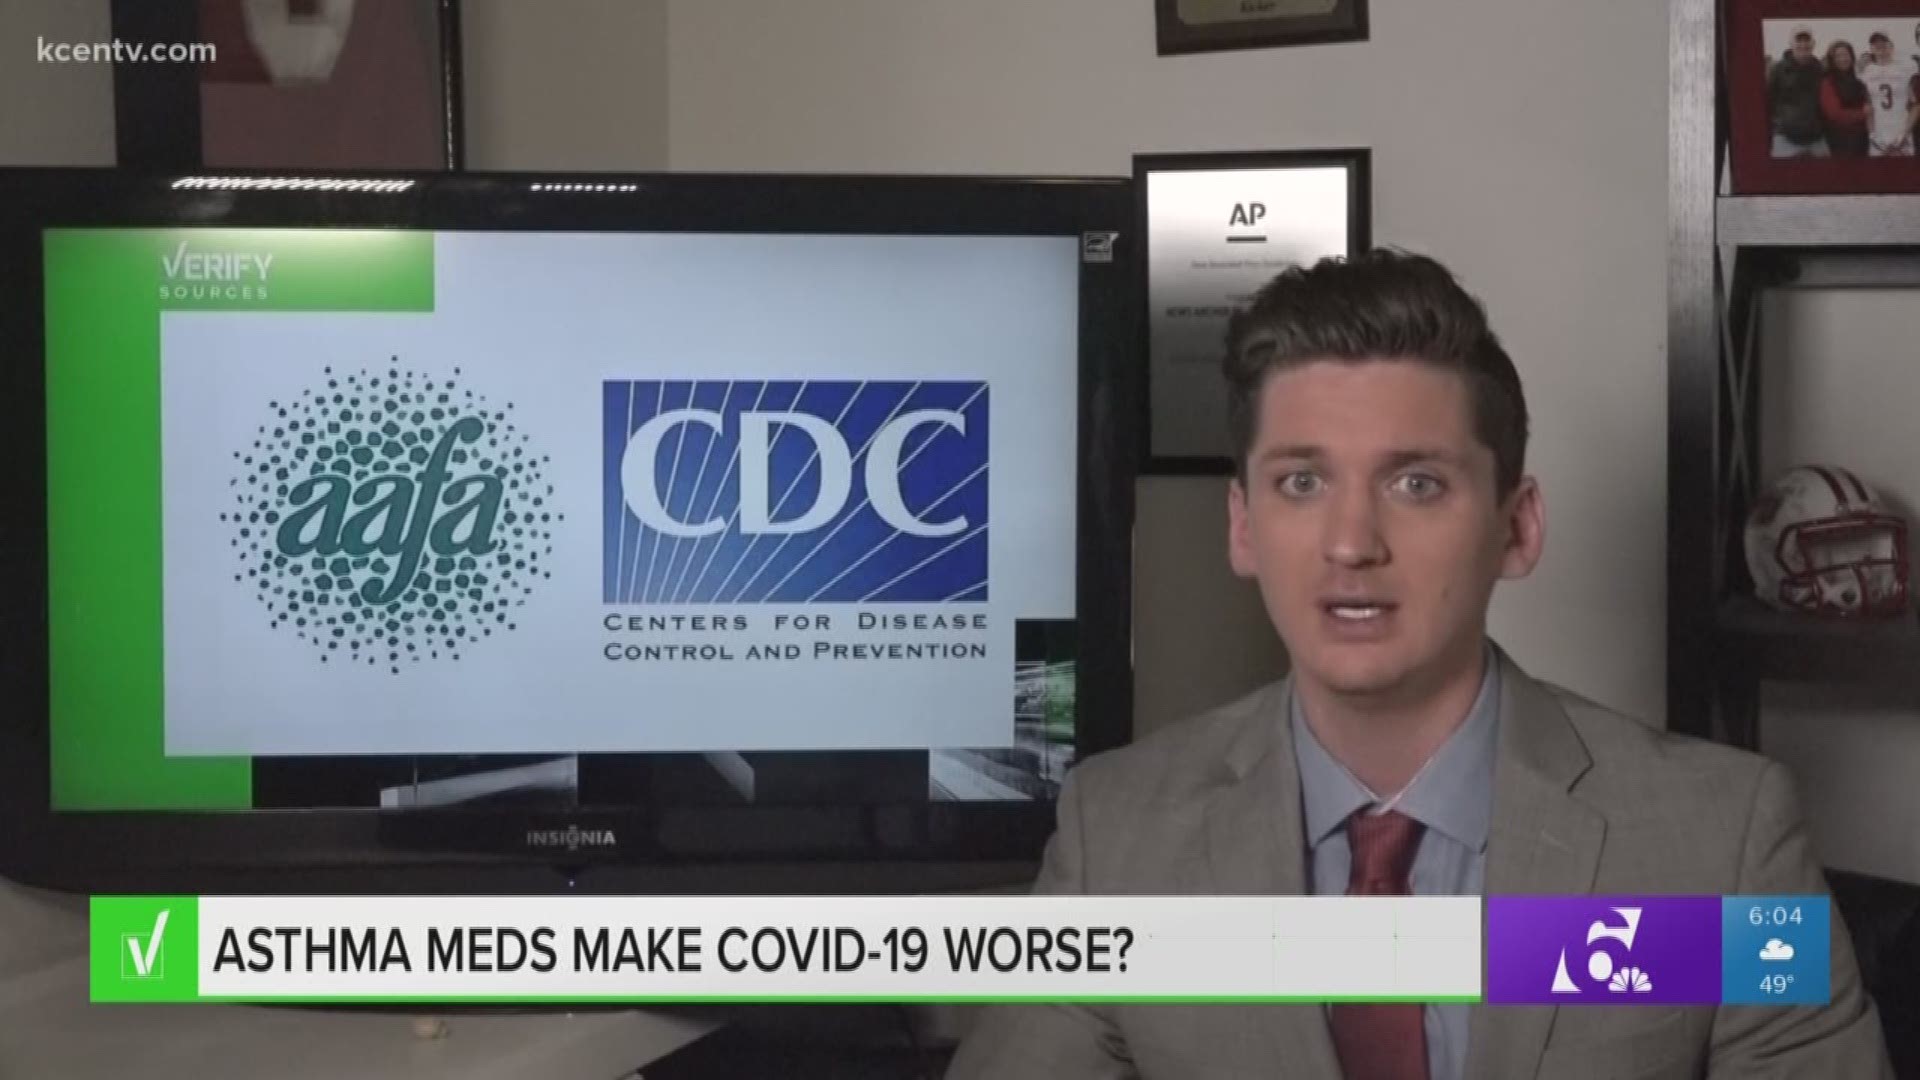 This question has been swirling around as reports come out that those with pre-existing conditions could have worse COVID-19 symptoms.